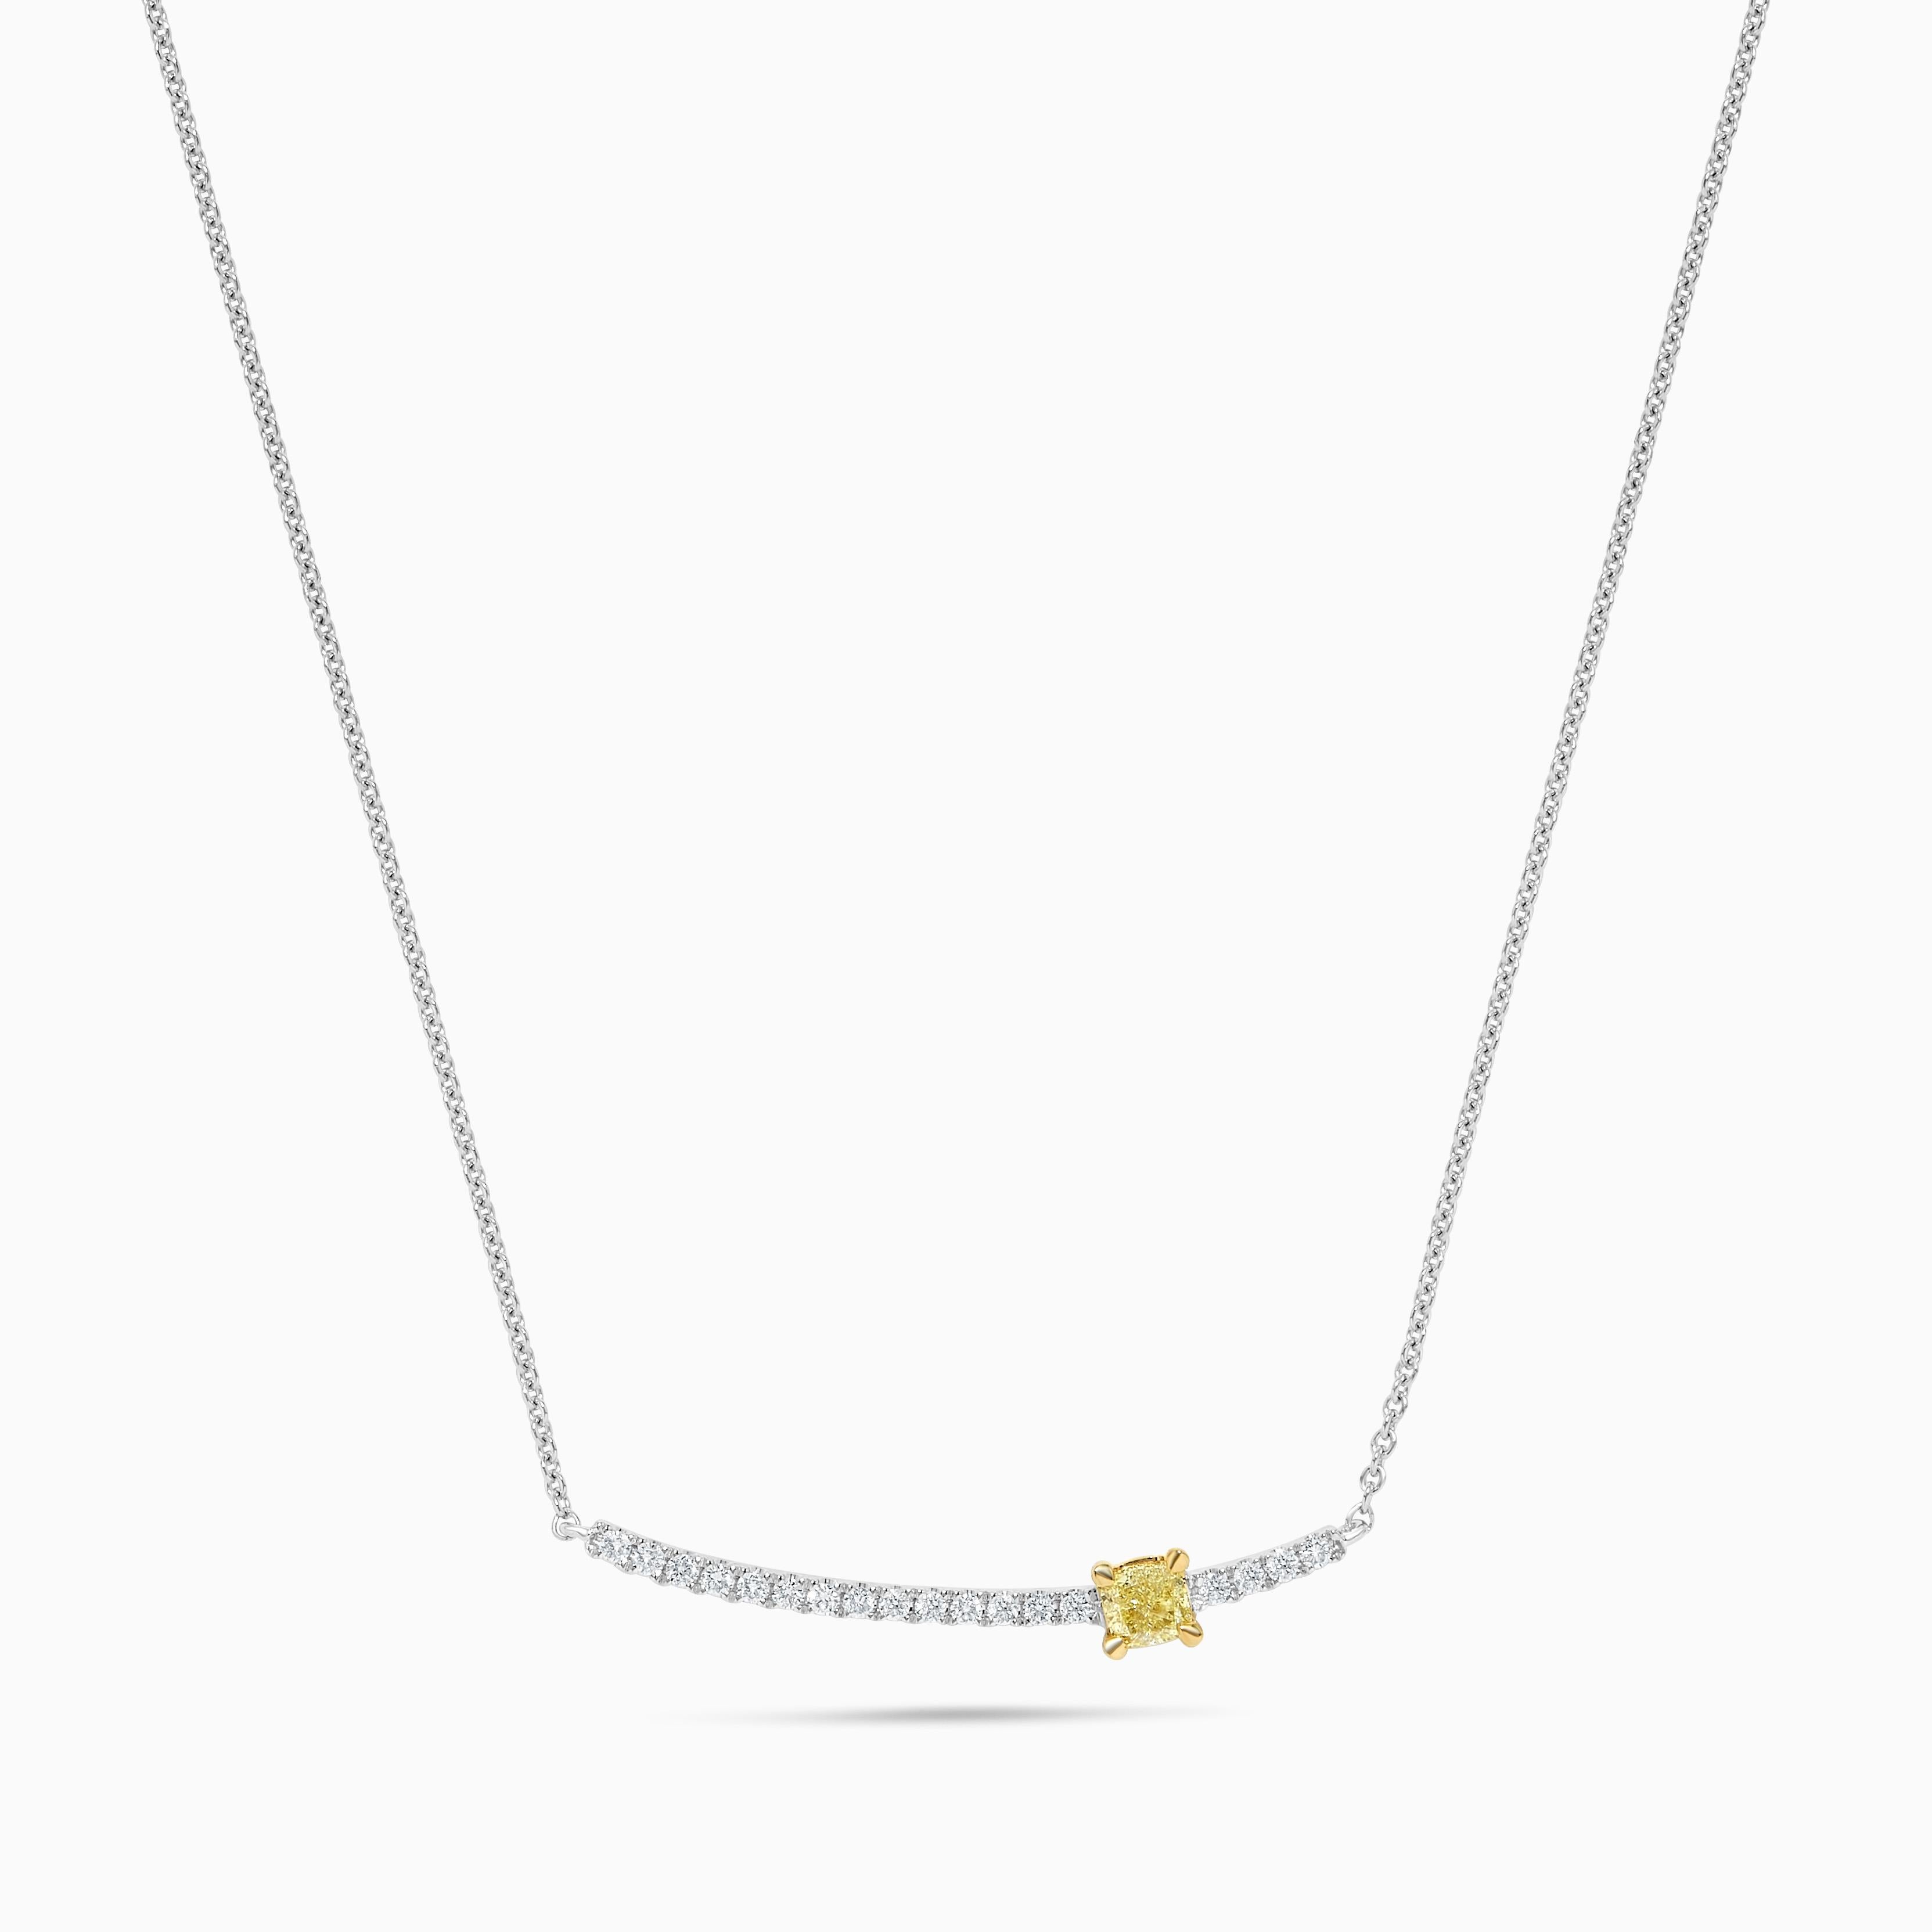 RareGemWorld's intriguing diamond necklace. Mounted in a beautiful 14K Yellow and White Gold setting with a natural cushion cut yellow diamond. The yellow diamond is surrounded by small round natural white diamond melee. This necklace is guaranteed